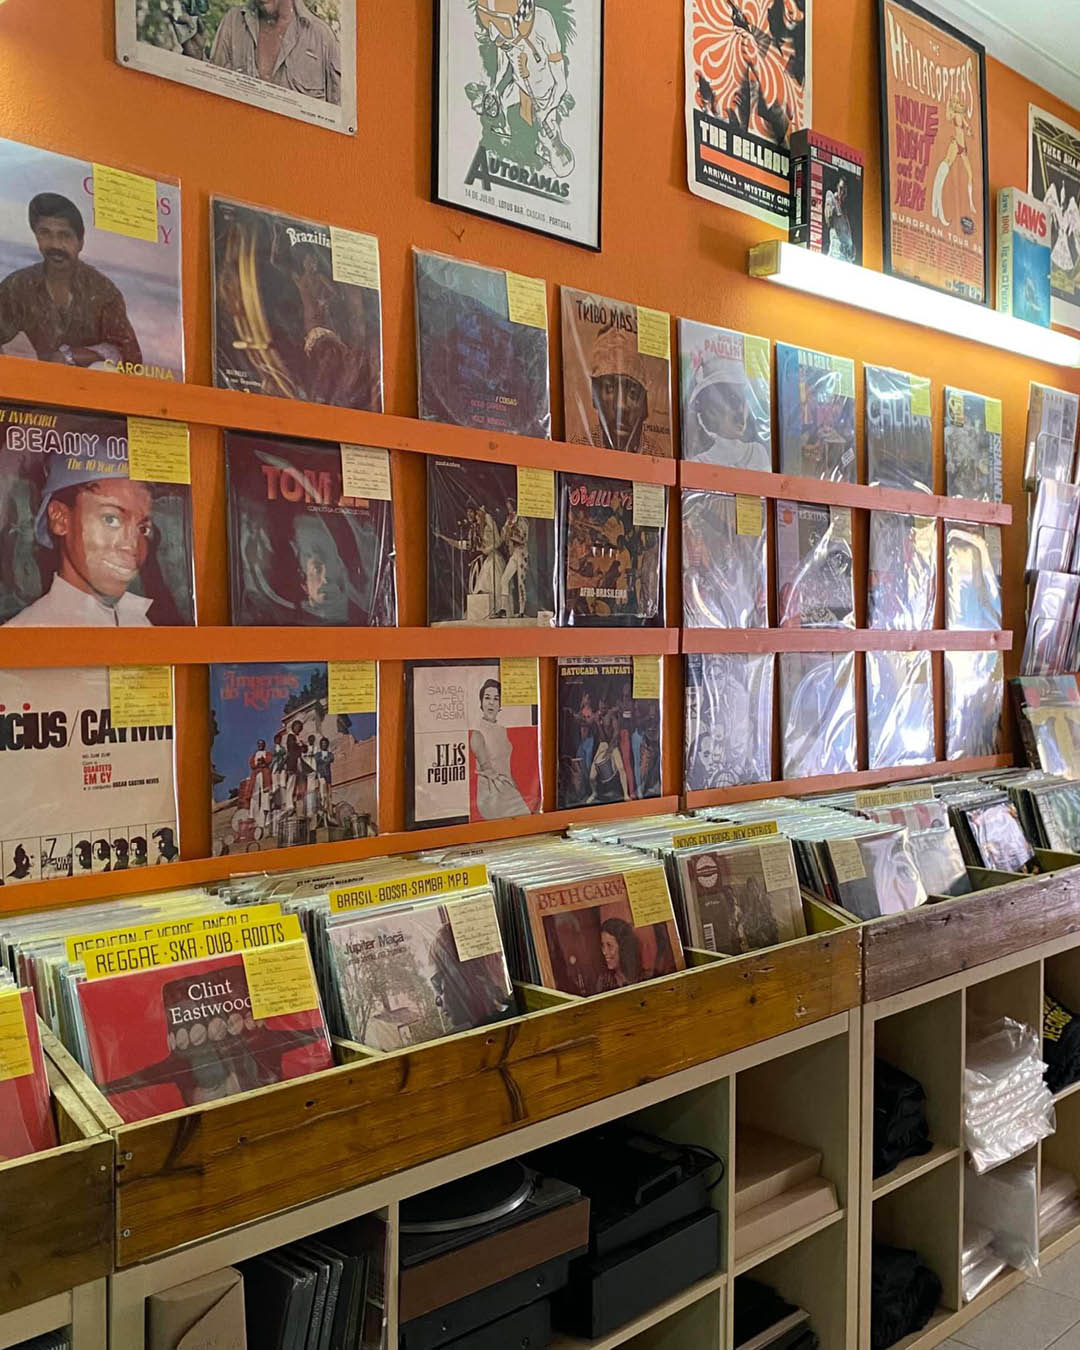 Vinyl records in their sleeves on shelves and in crates at Groovie Records shop in Lisbon.